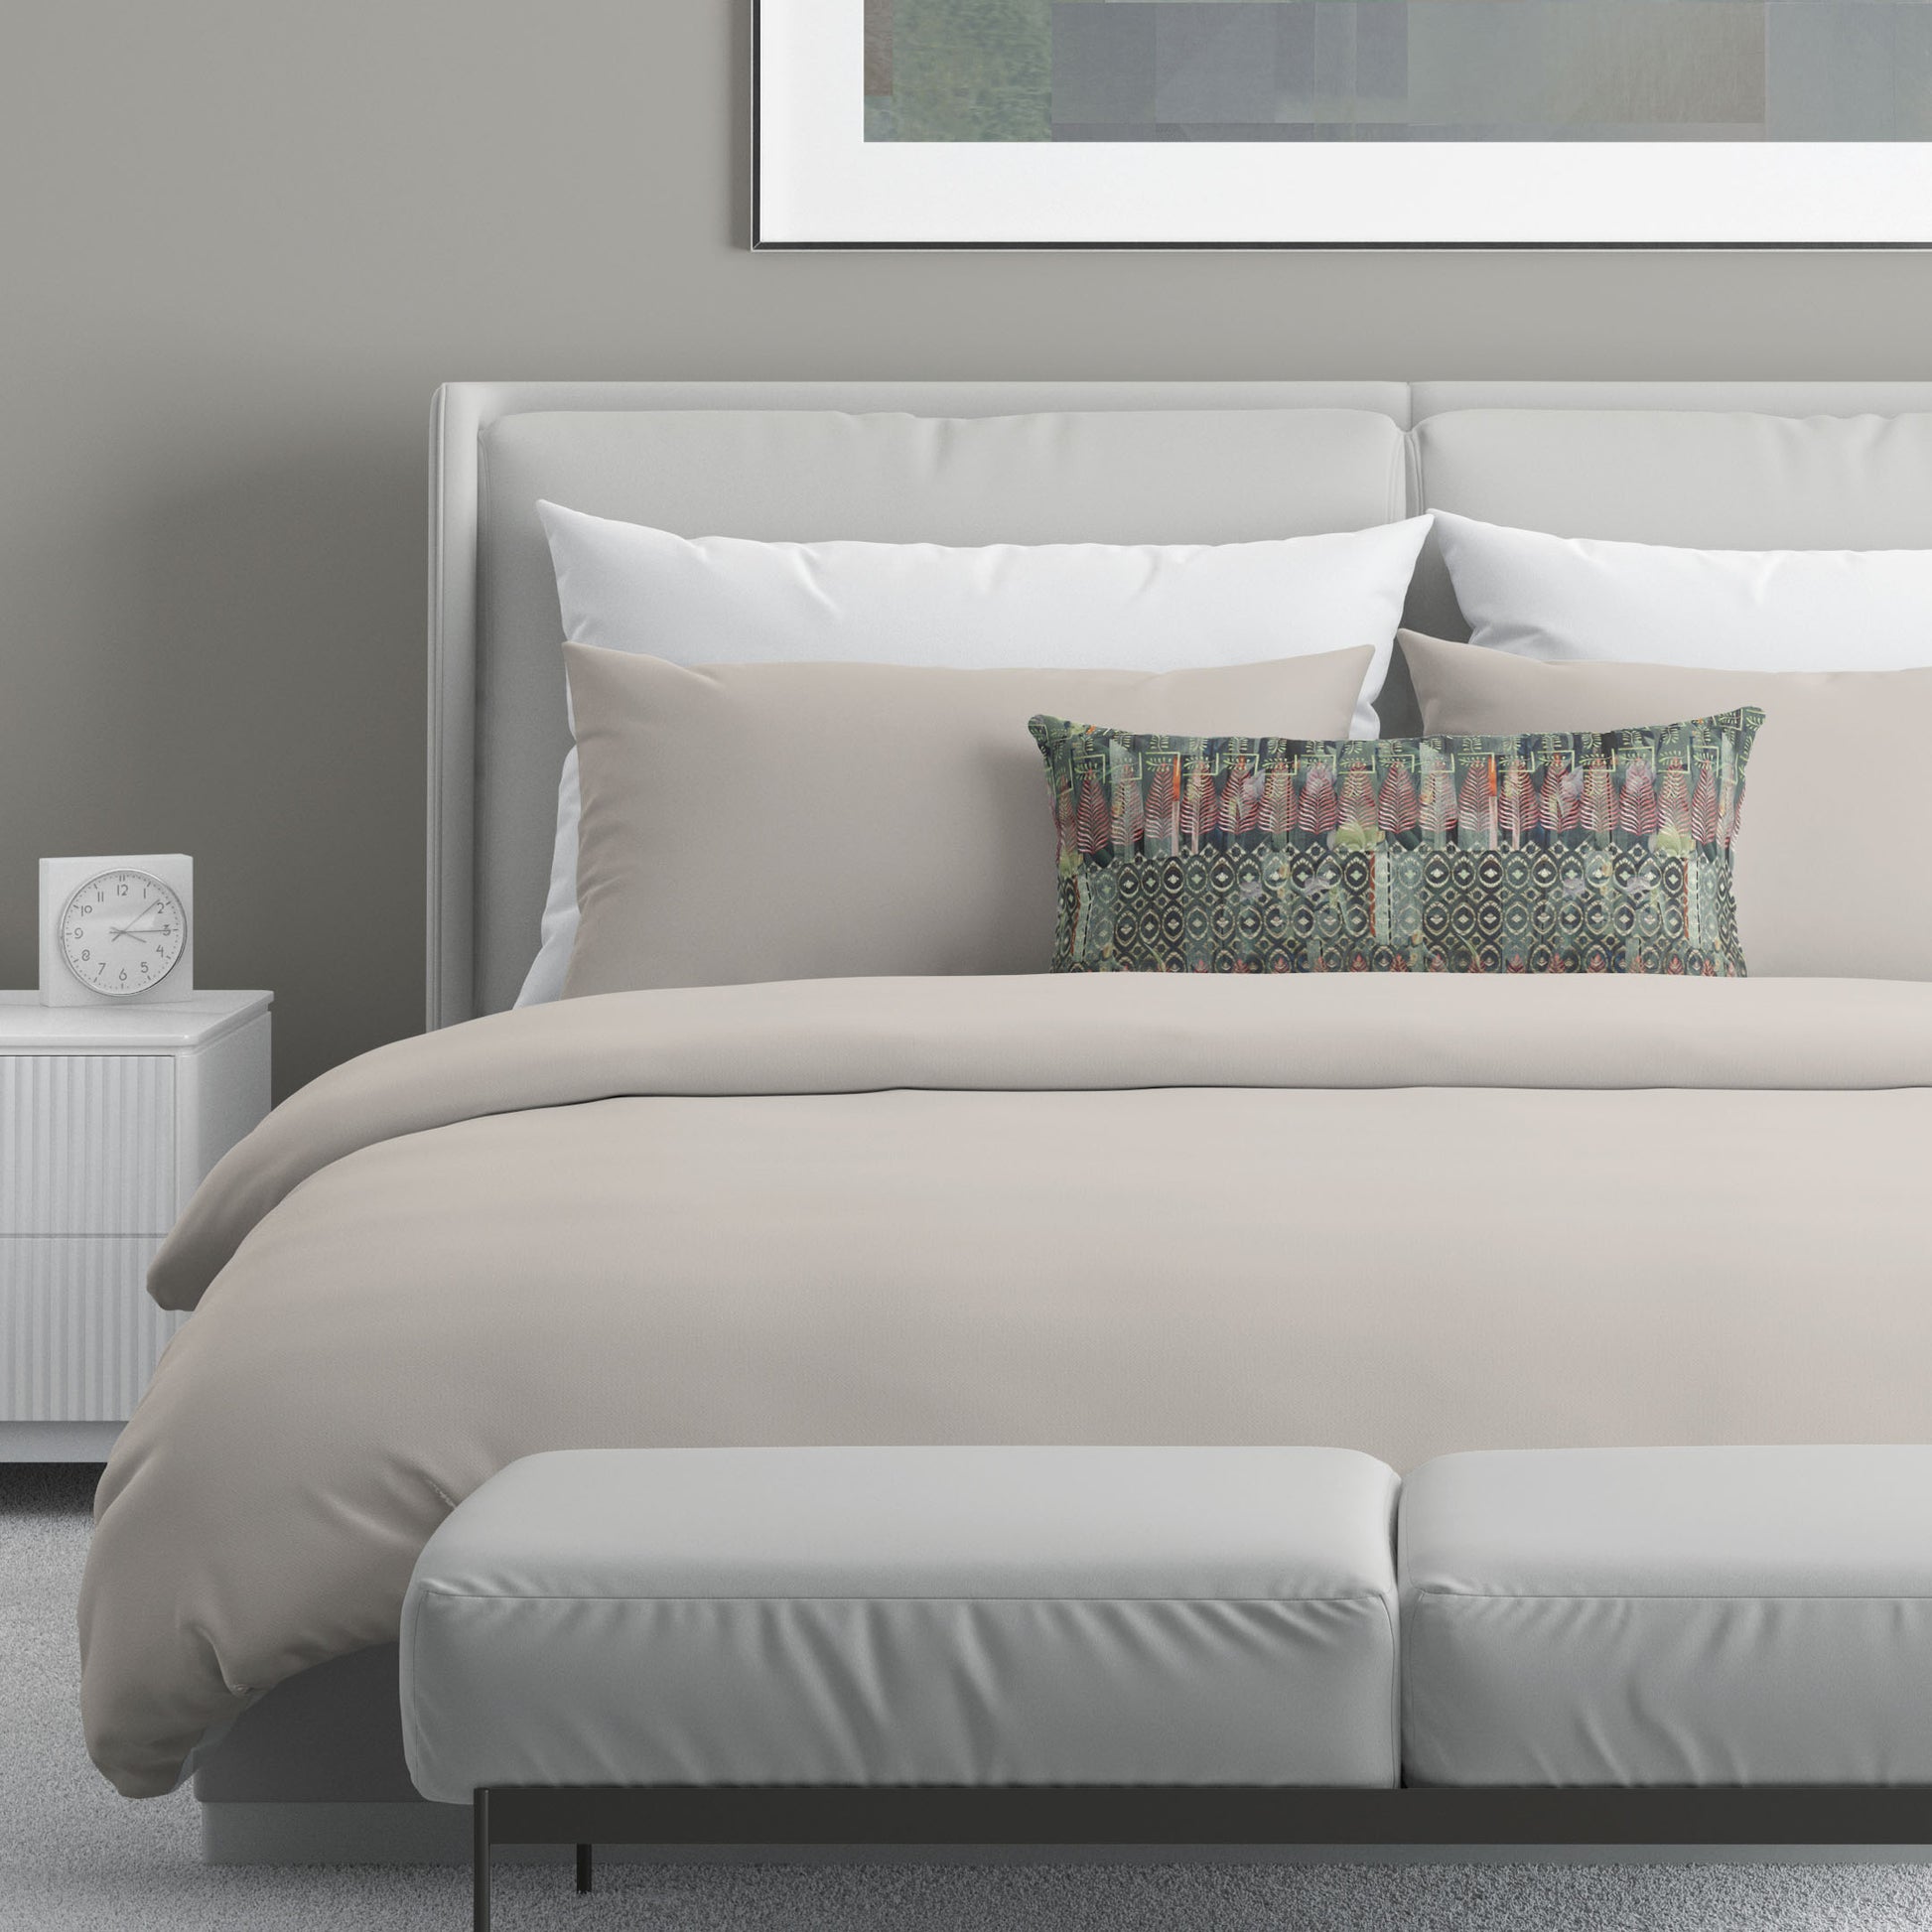 Neutral colored bedroom featuring a bed with a green and red abstract patterned lumbar pillow.